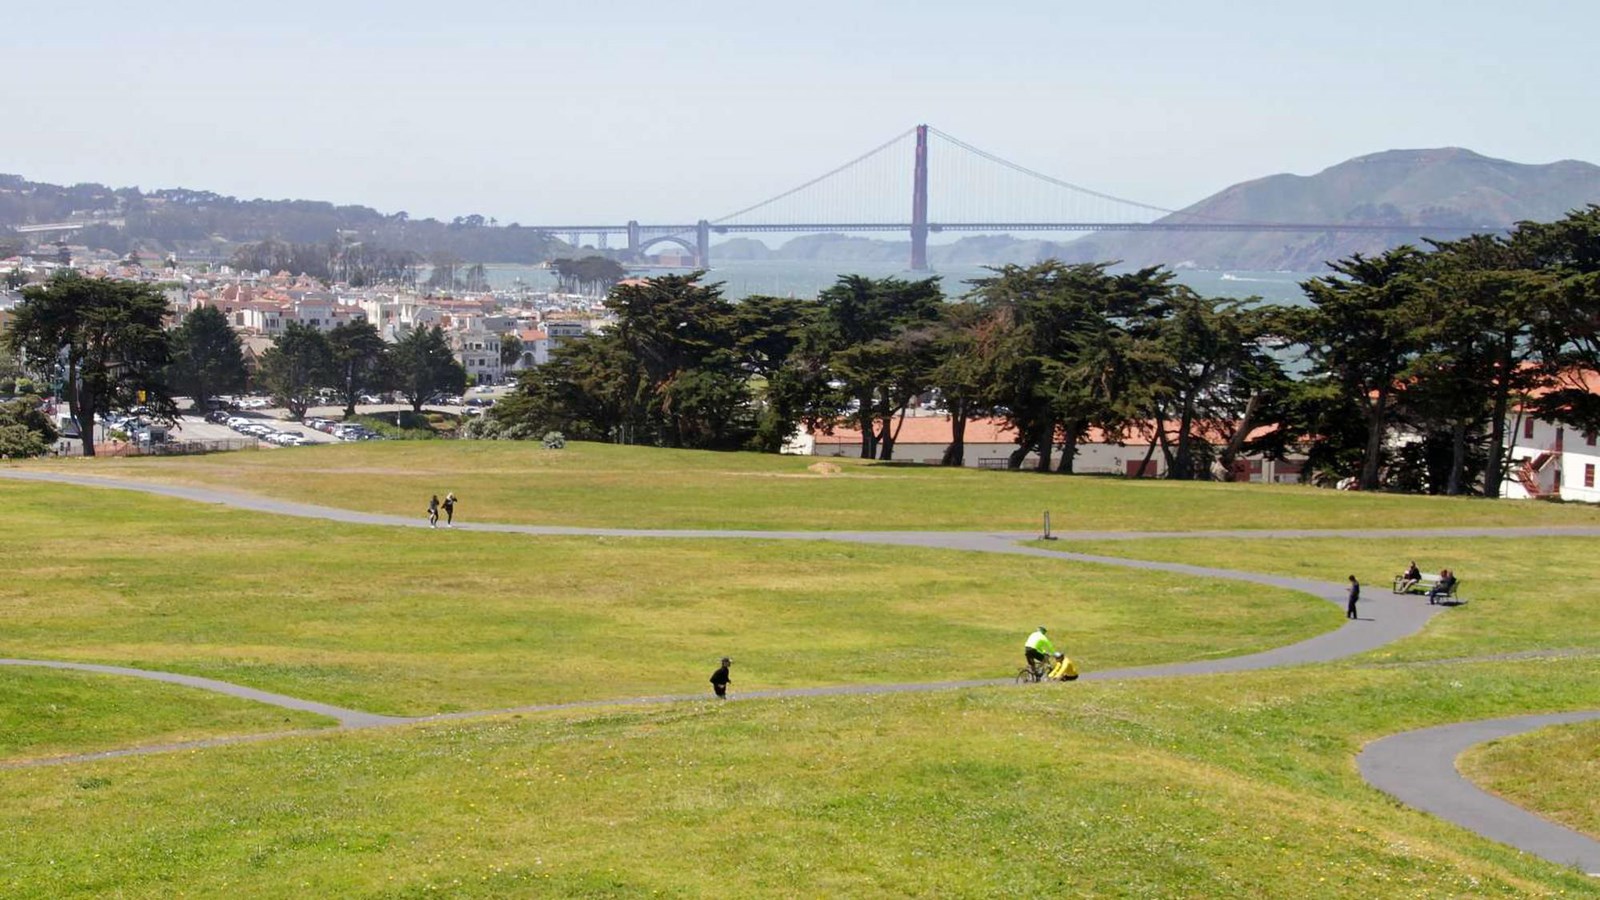 A view across the Great Meadow with winding paths through green grass and the Golden Gate Bridge. 